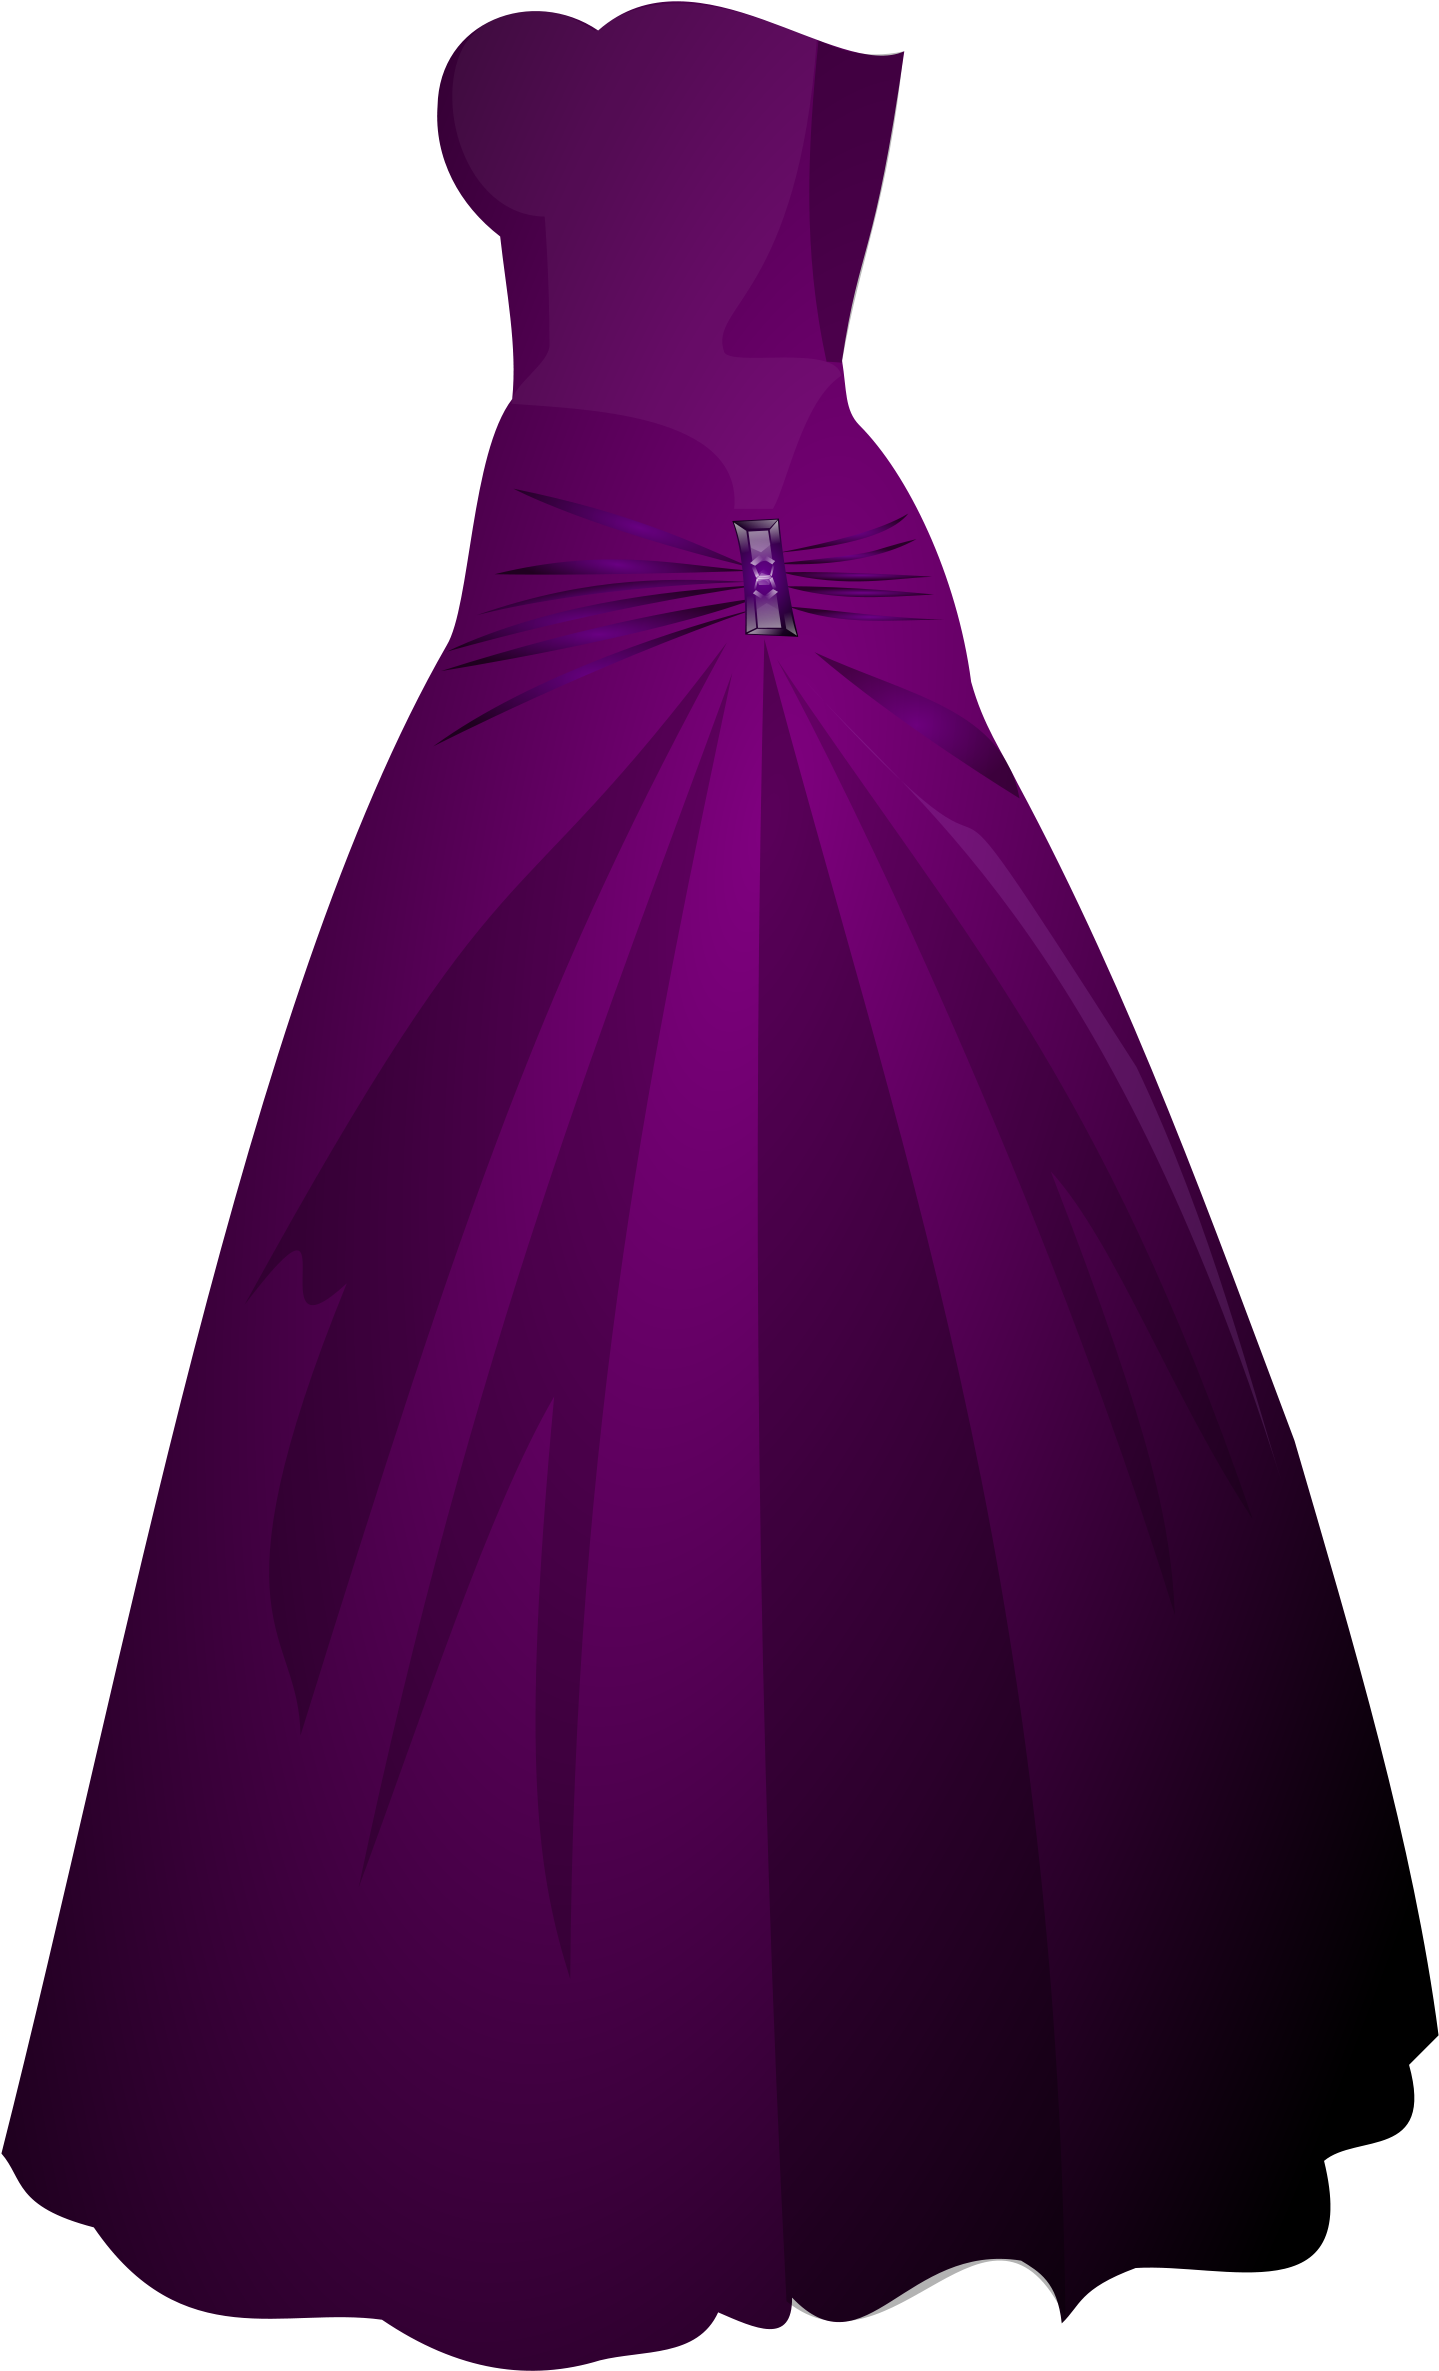 Download Dress PNG Image with No Background - PNGkey.com